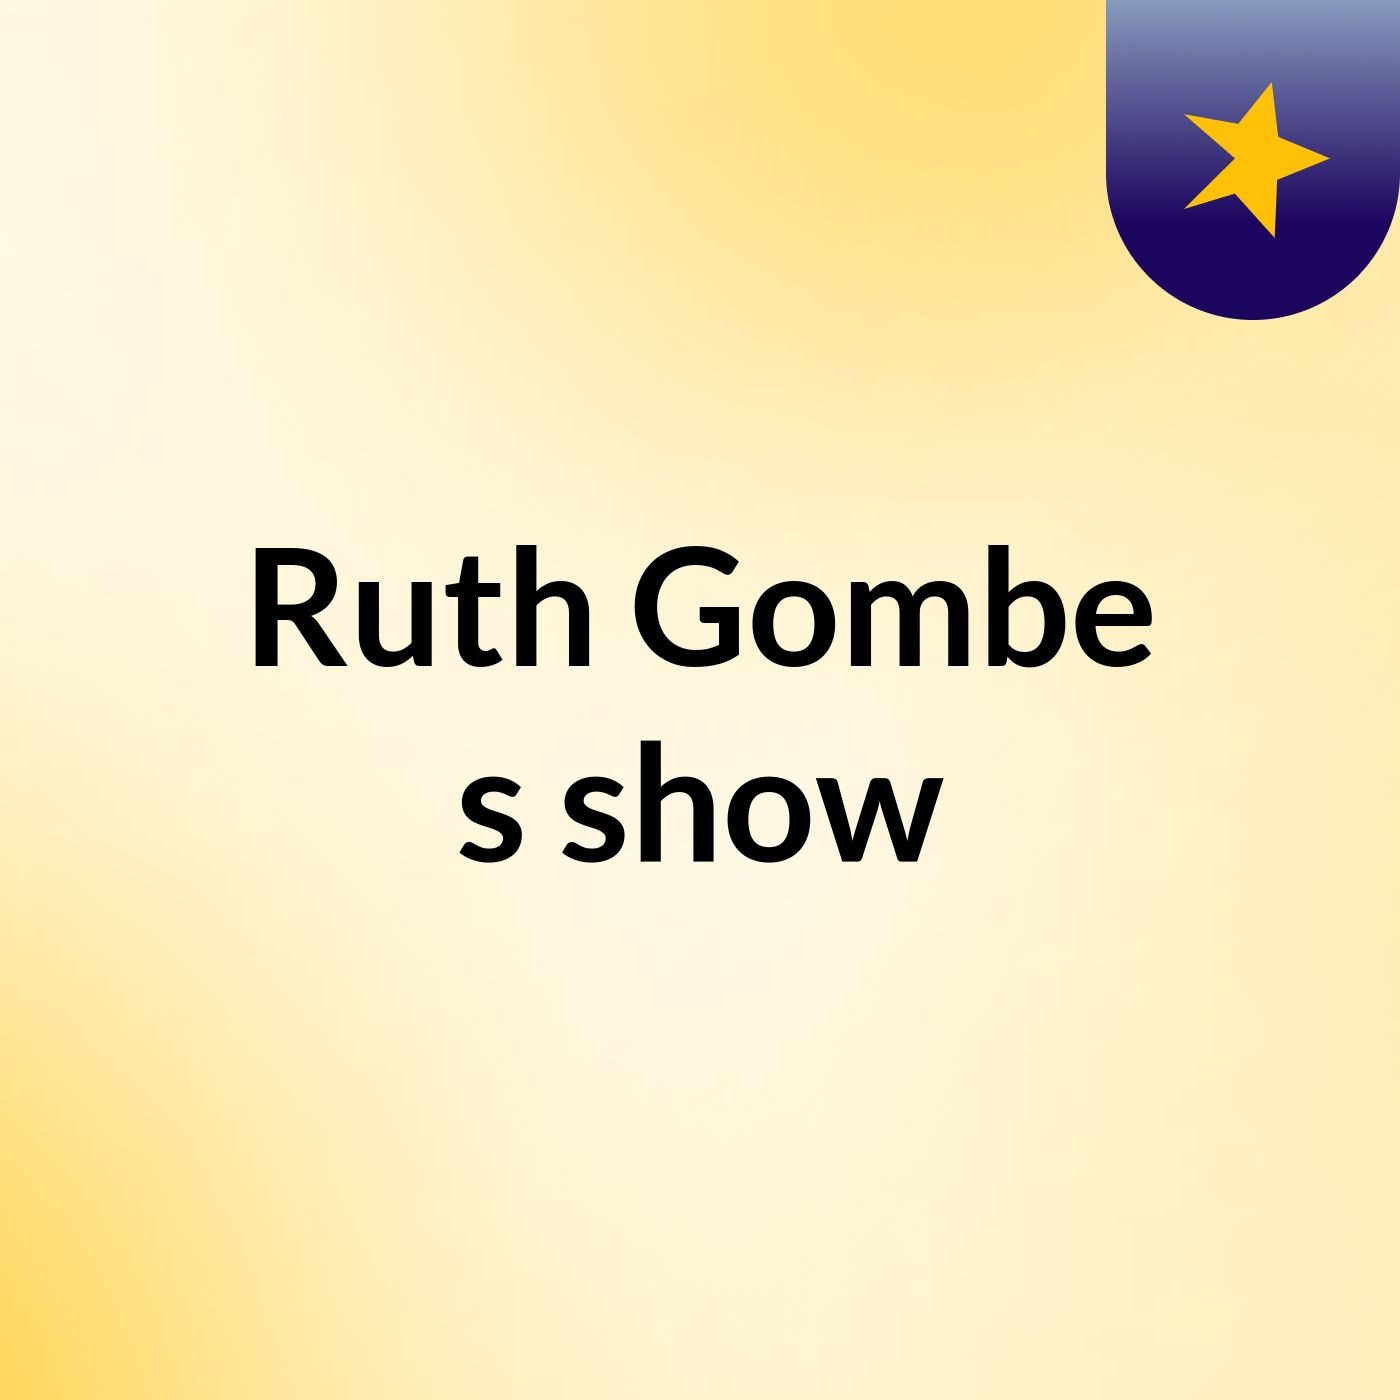 Ruth Gombe's show